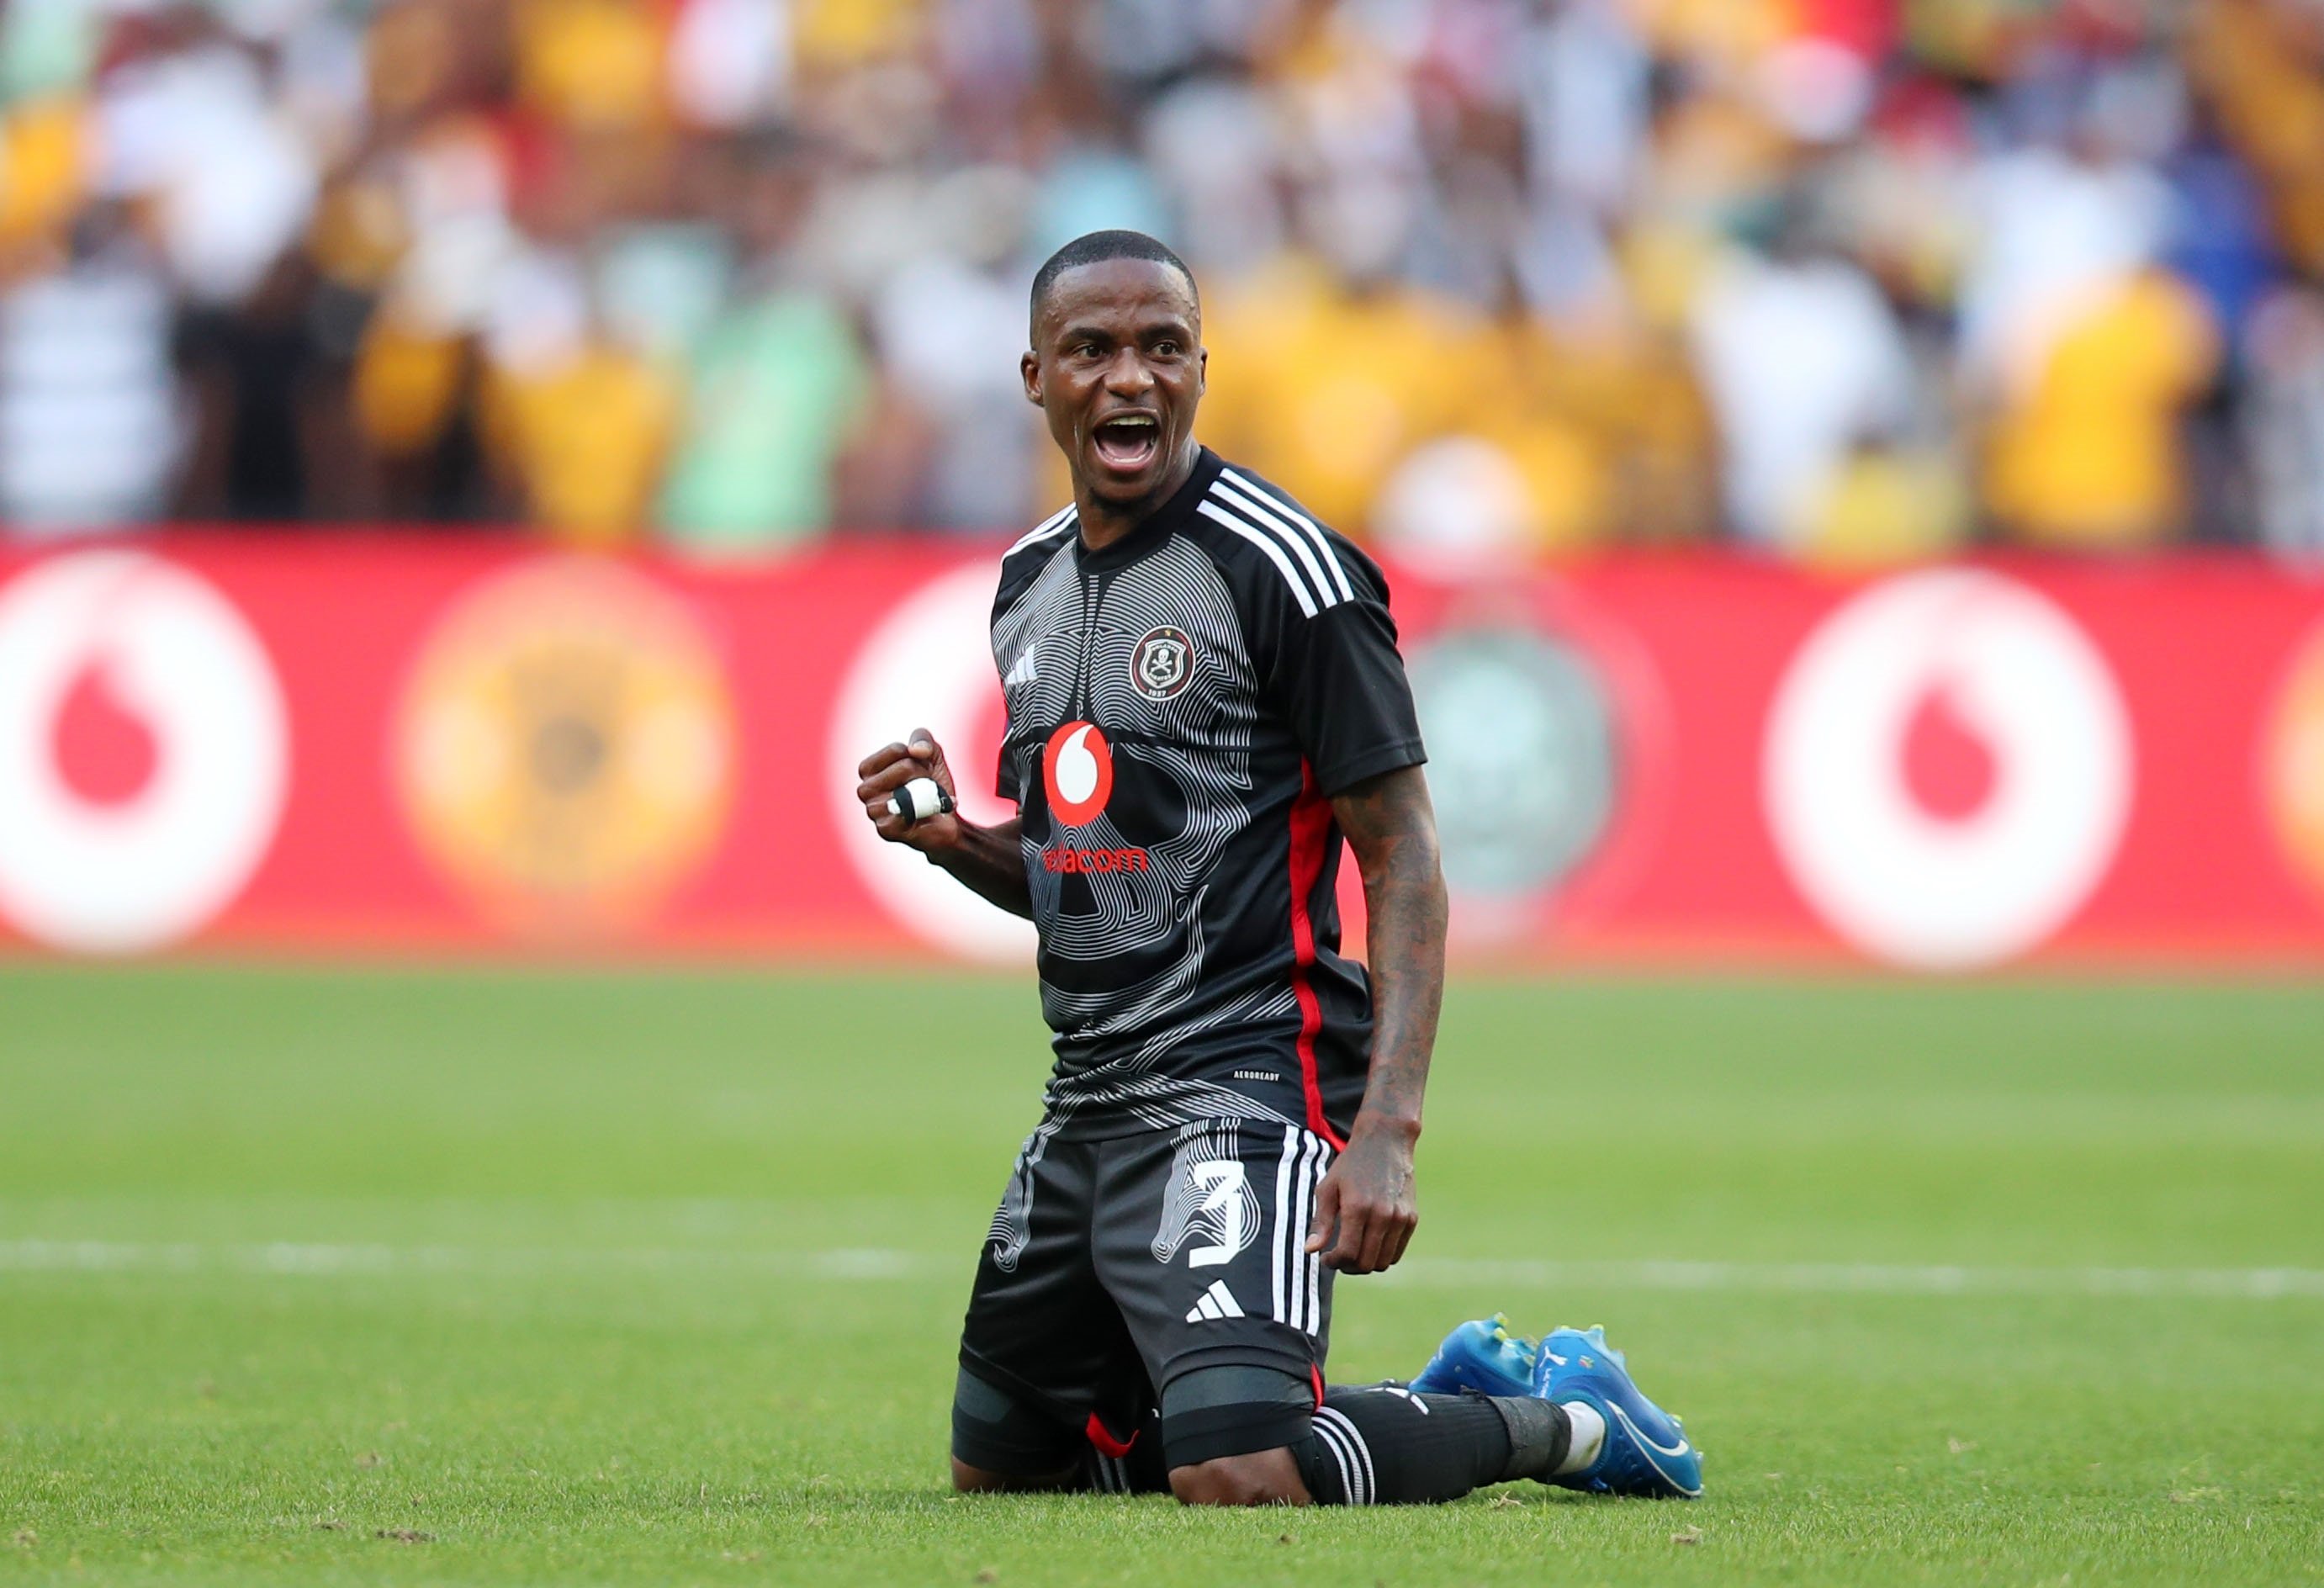 Insider: Lorch Back Despite DC Issues 